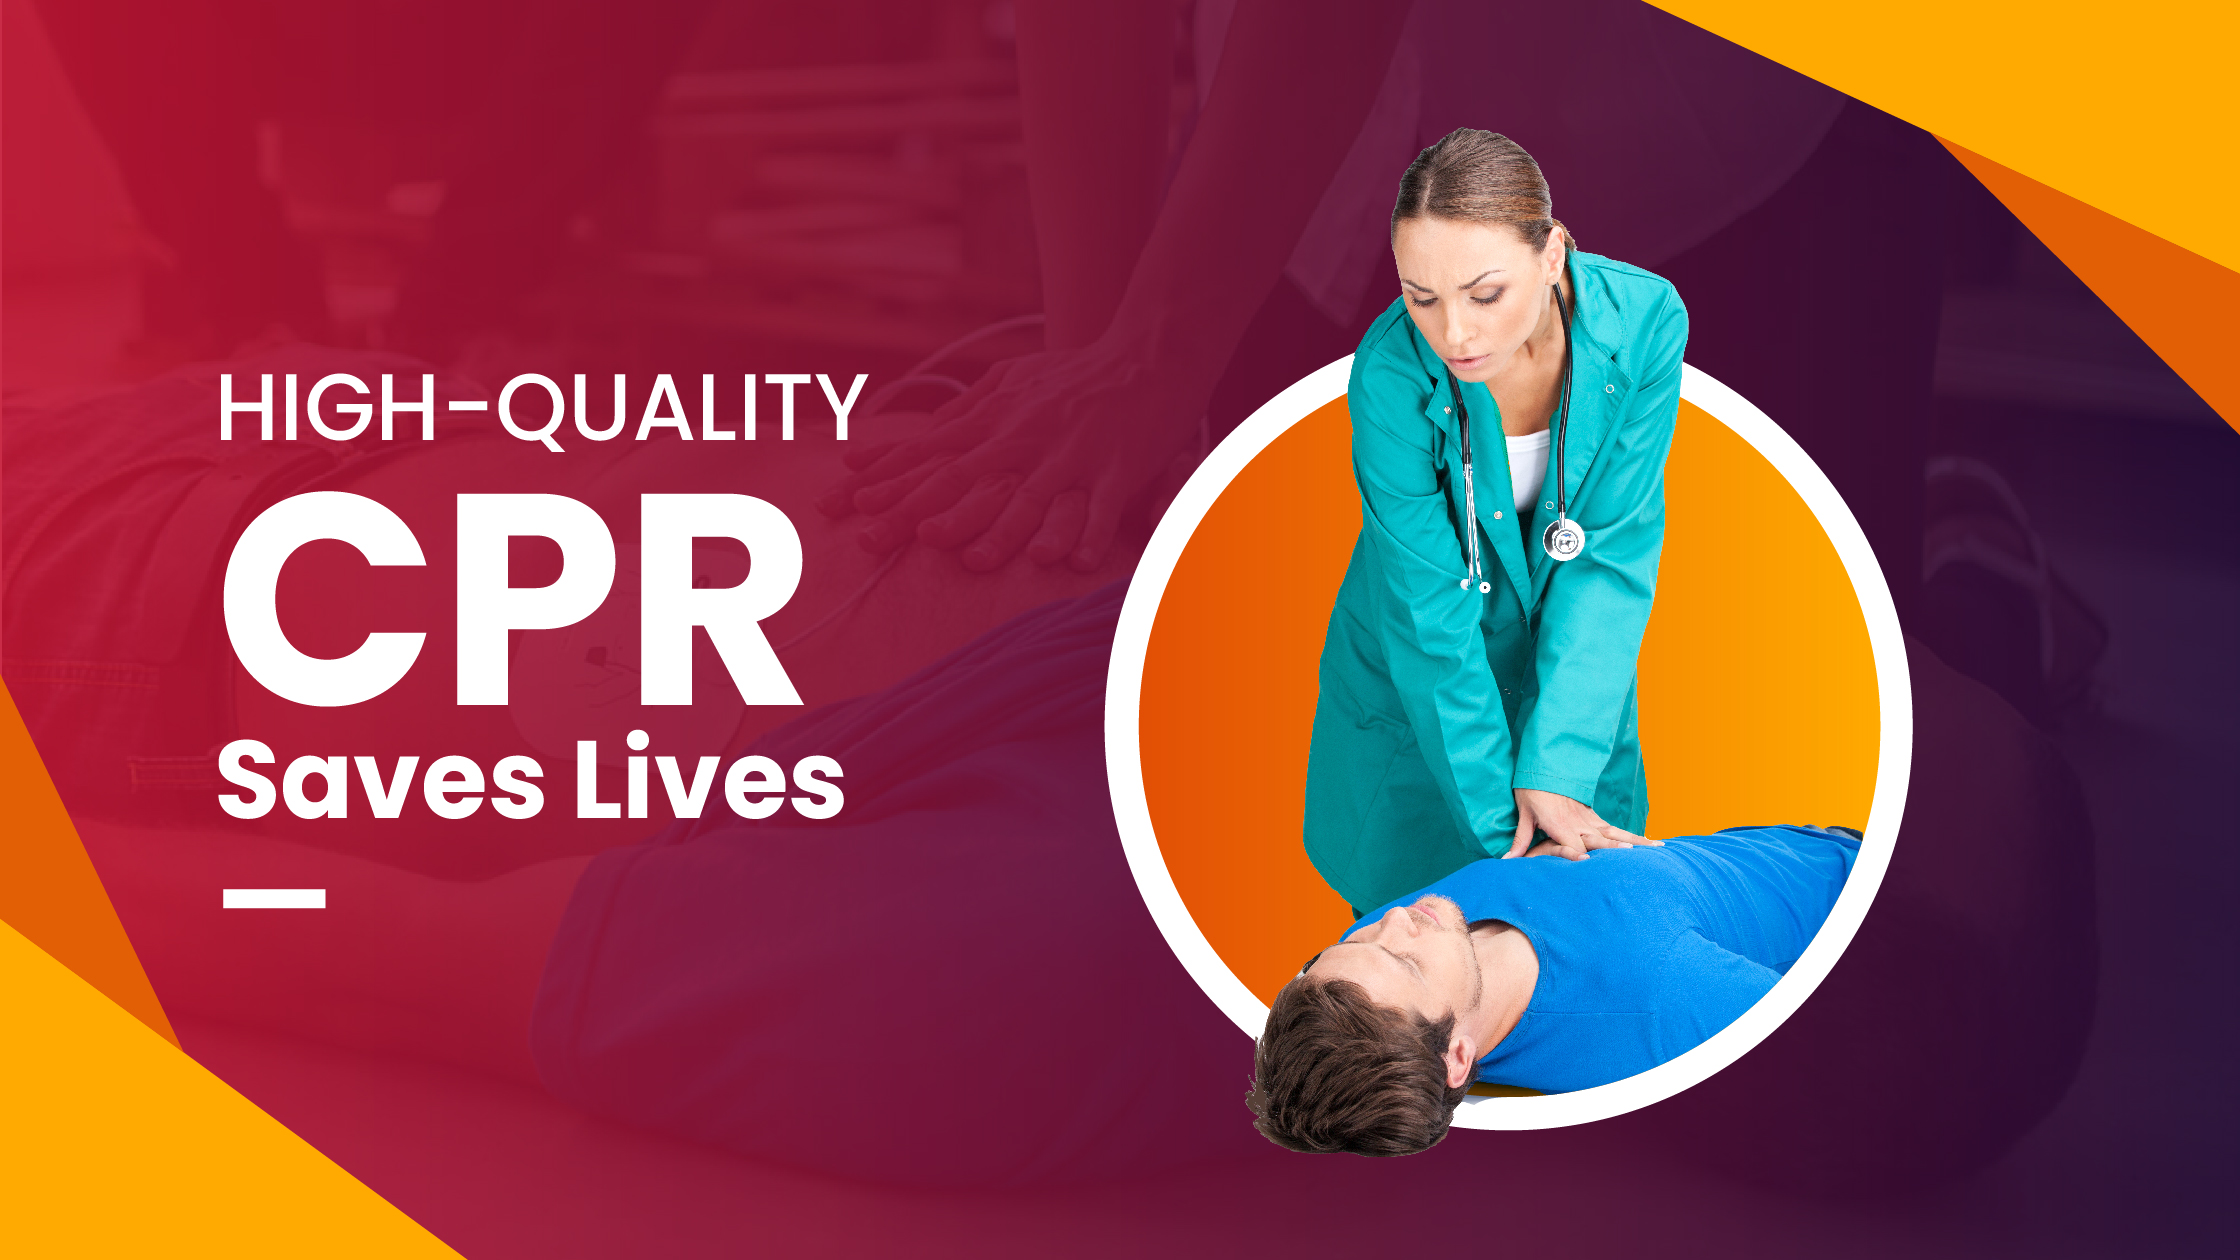 How to Perform High-Quality CPR in Order to Save Lives